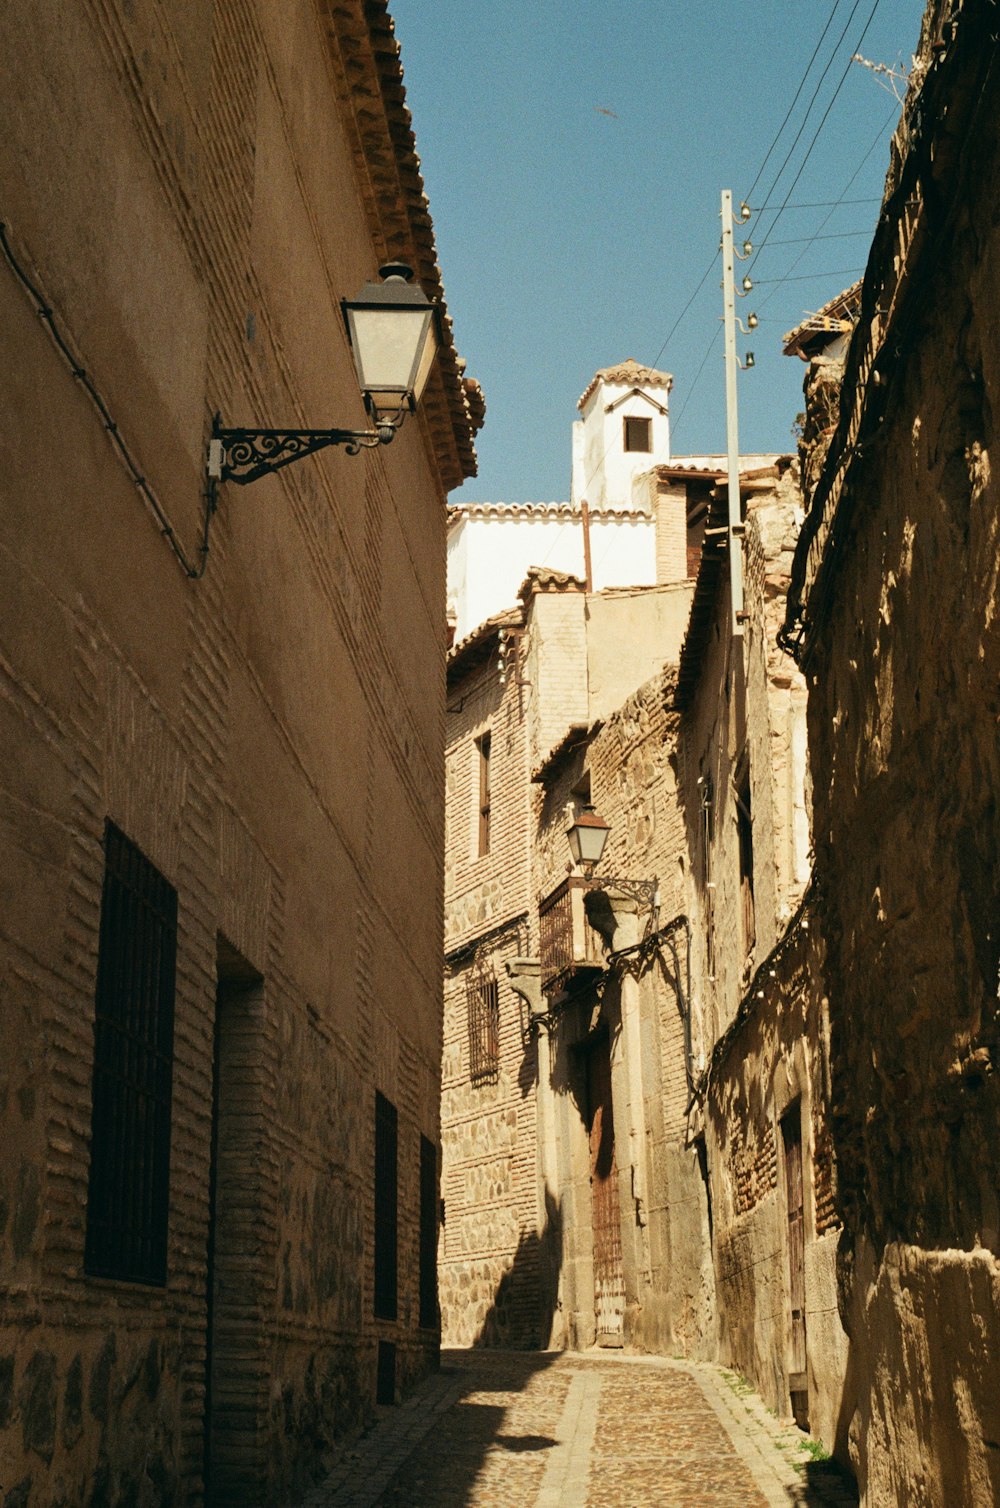 a narrow alley with a clock tower in the background